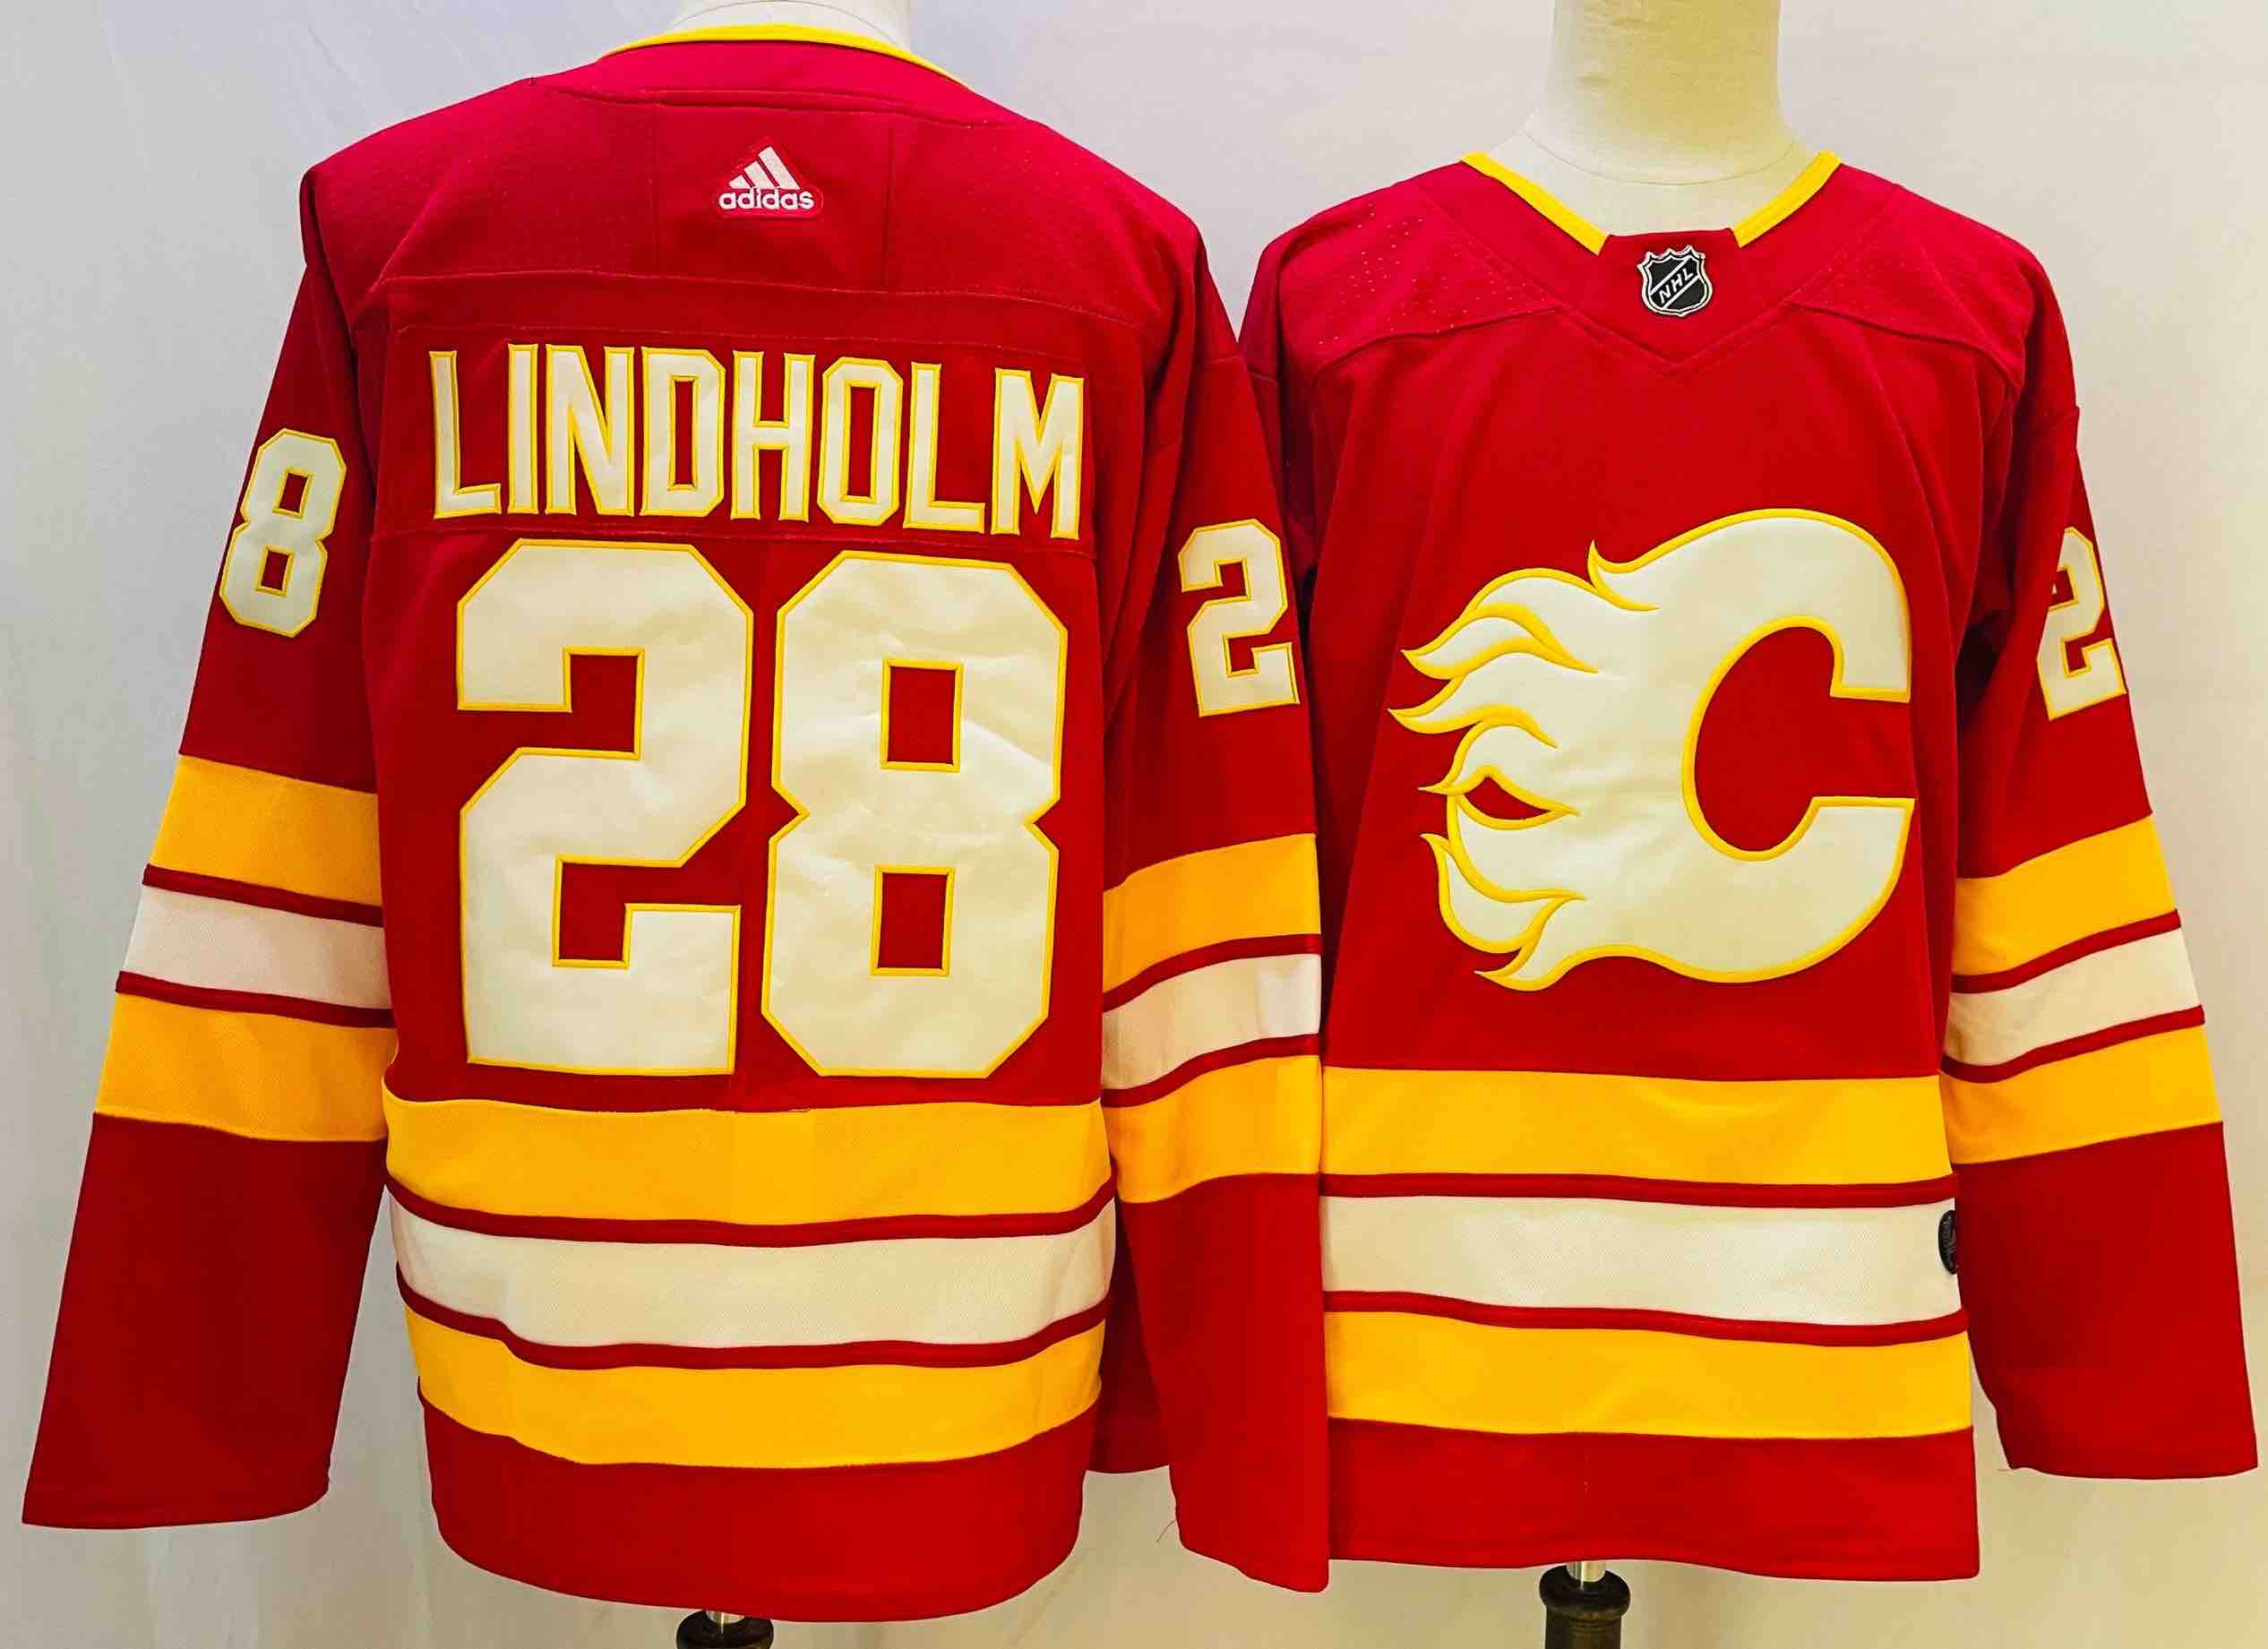 Adidas NHL Calgary Flames #28 Lindholm Red Jersey